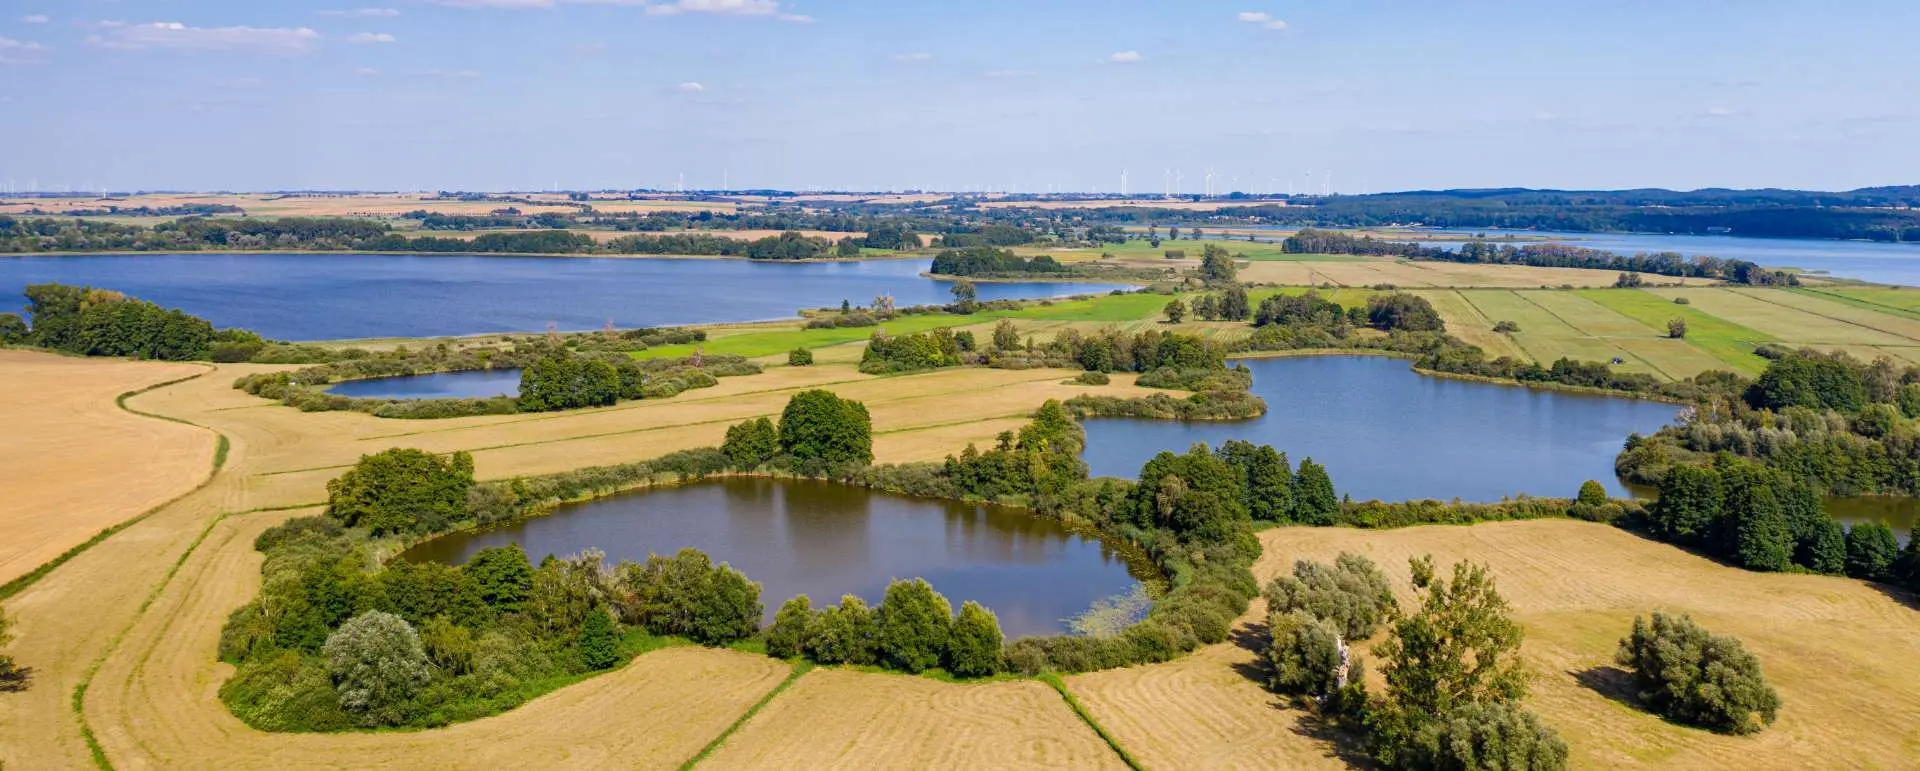 Uckermark - the destination for families